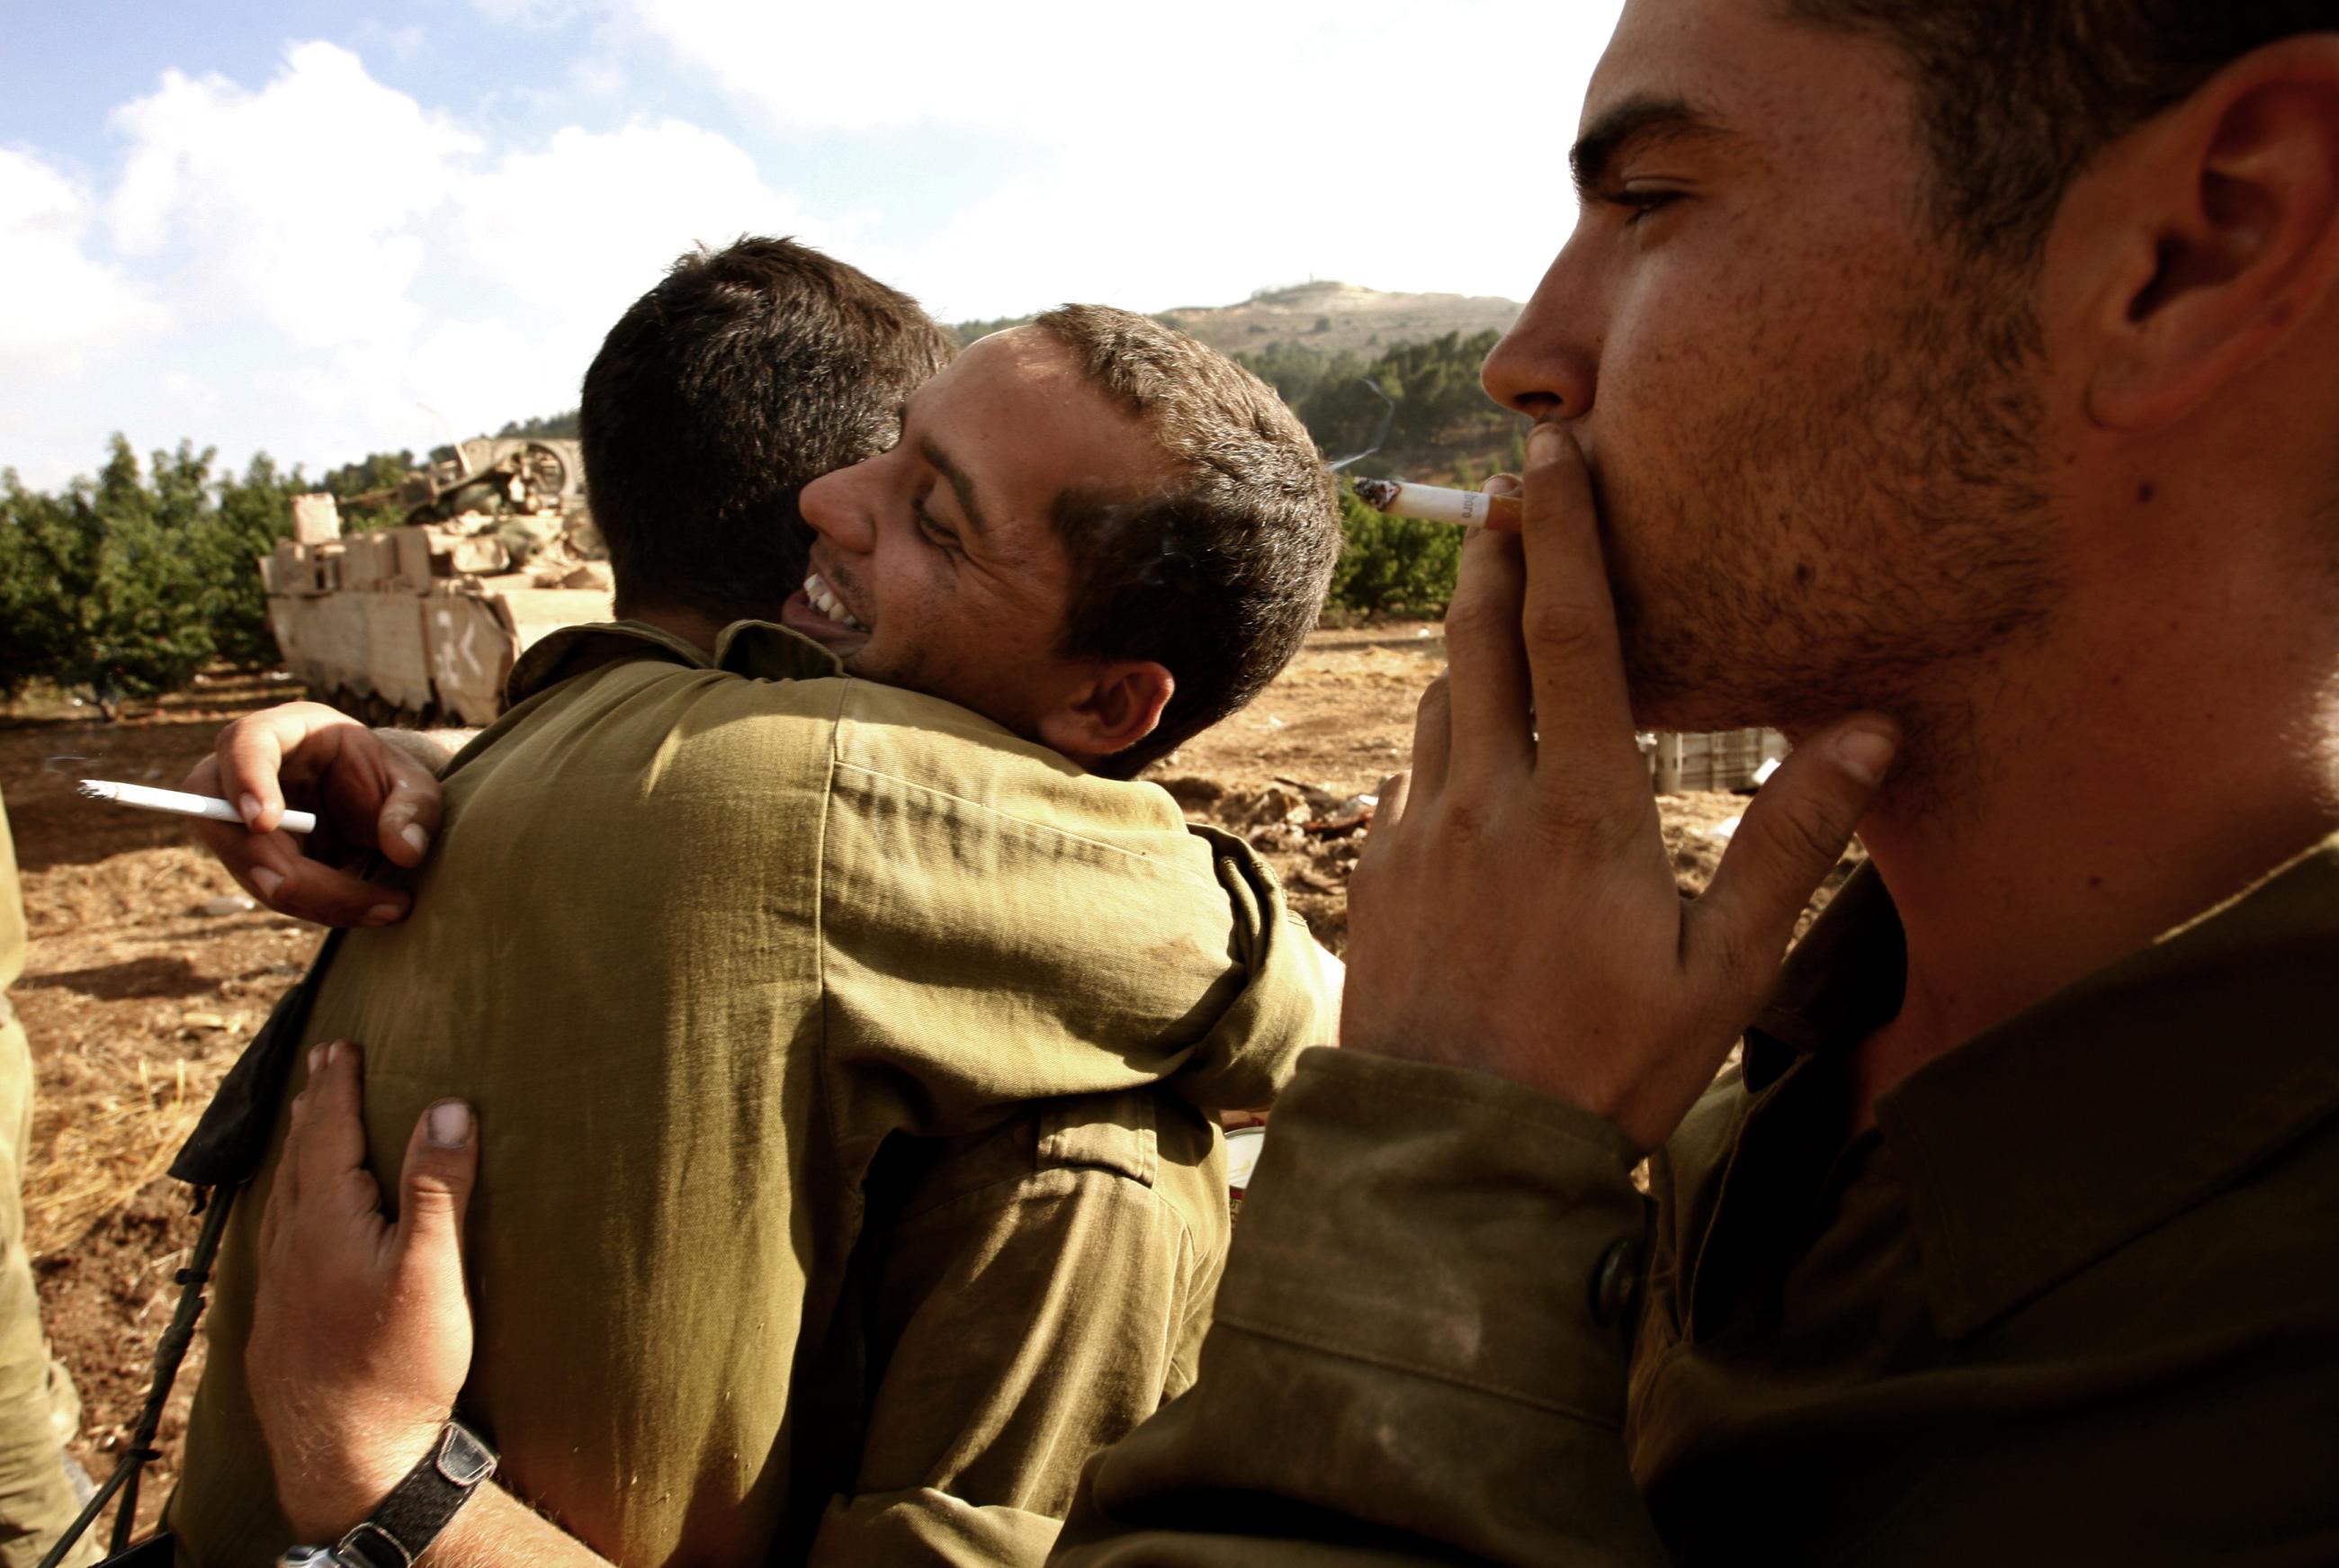 Israeli soldiers embrace near the northern Israeli town of Menara on the Israel-Lebanon border, after returning from combat operations in southern Lebanon, August 14, 2006. 